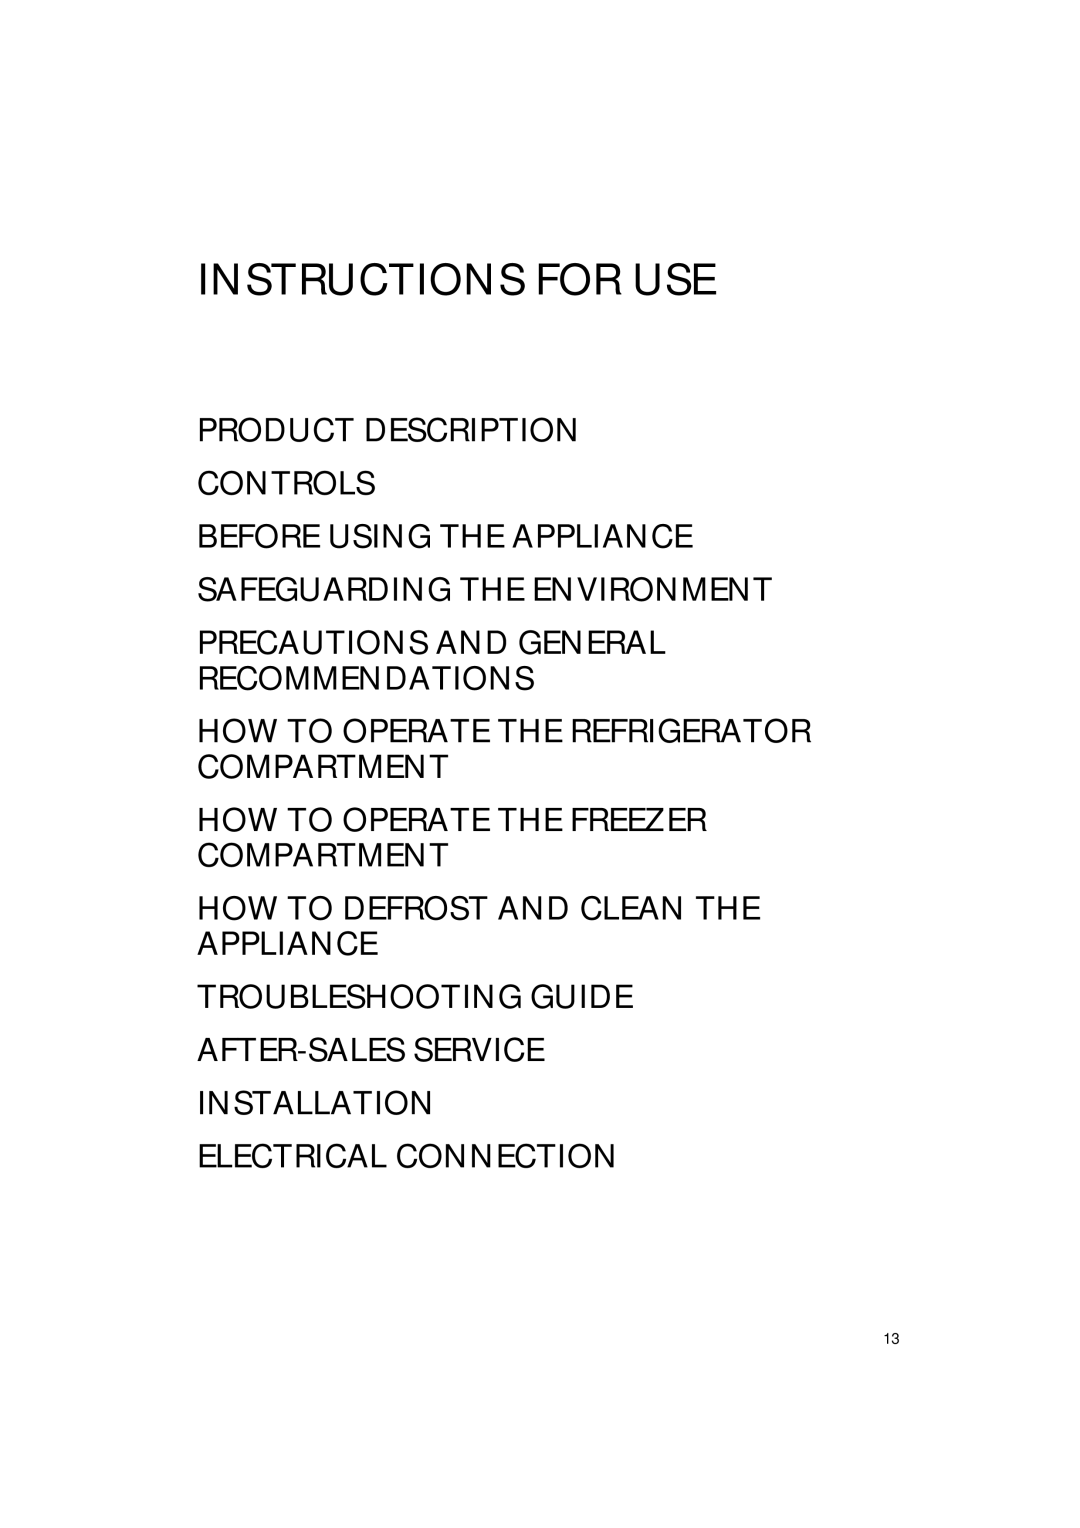 Smeg FR220APL manual Product Description Controls Before Using The Appliance, How To Operate The Refrigerator Compartment 